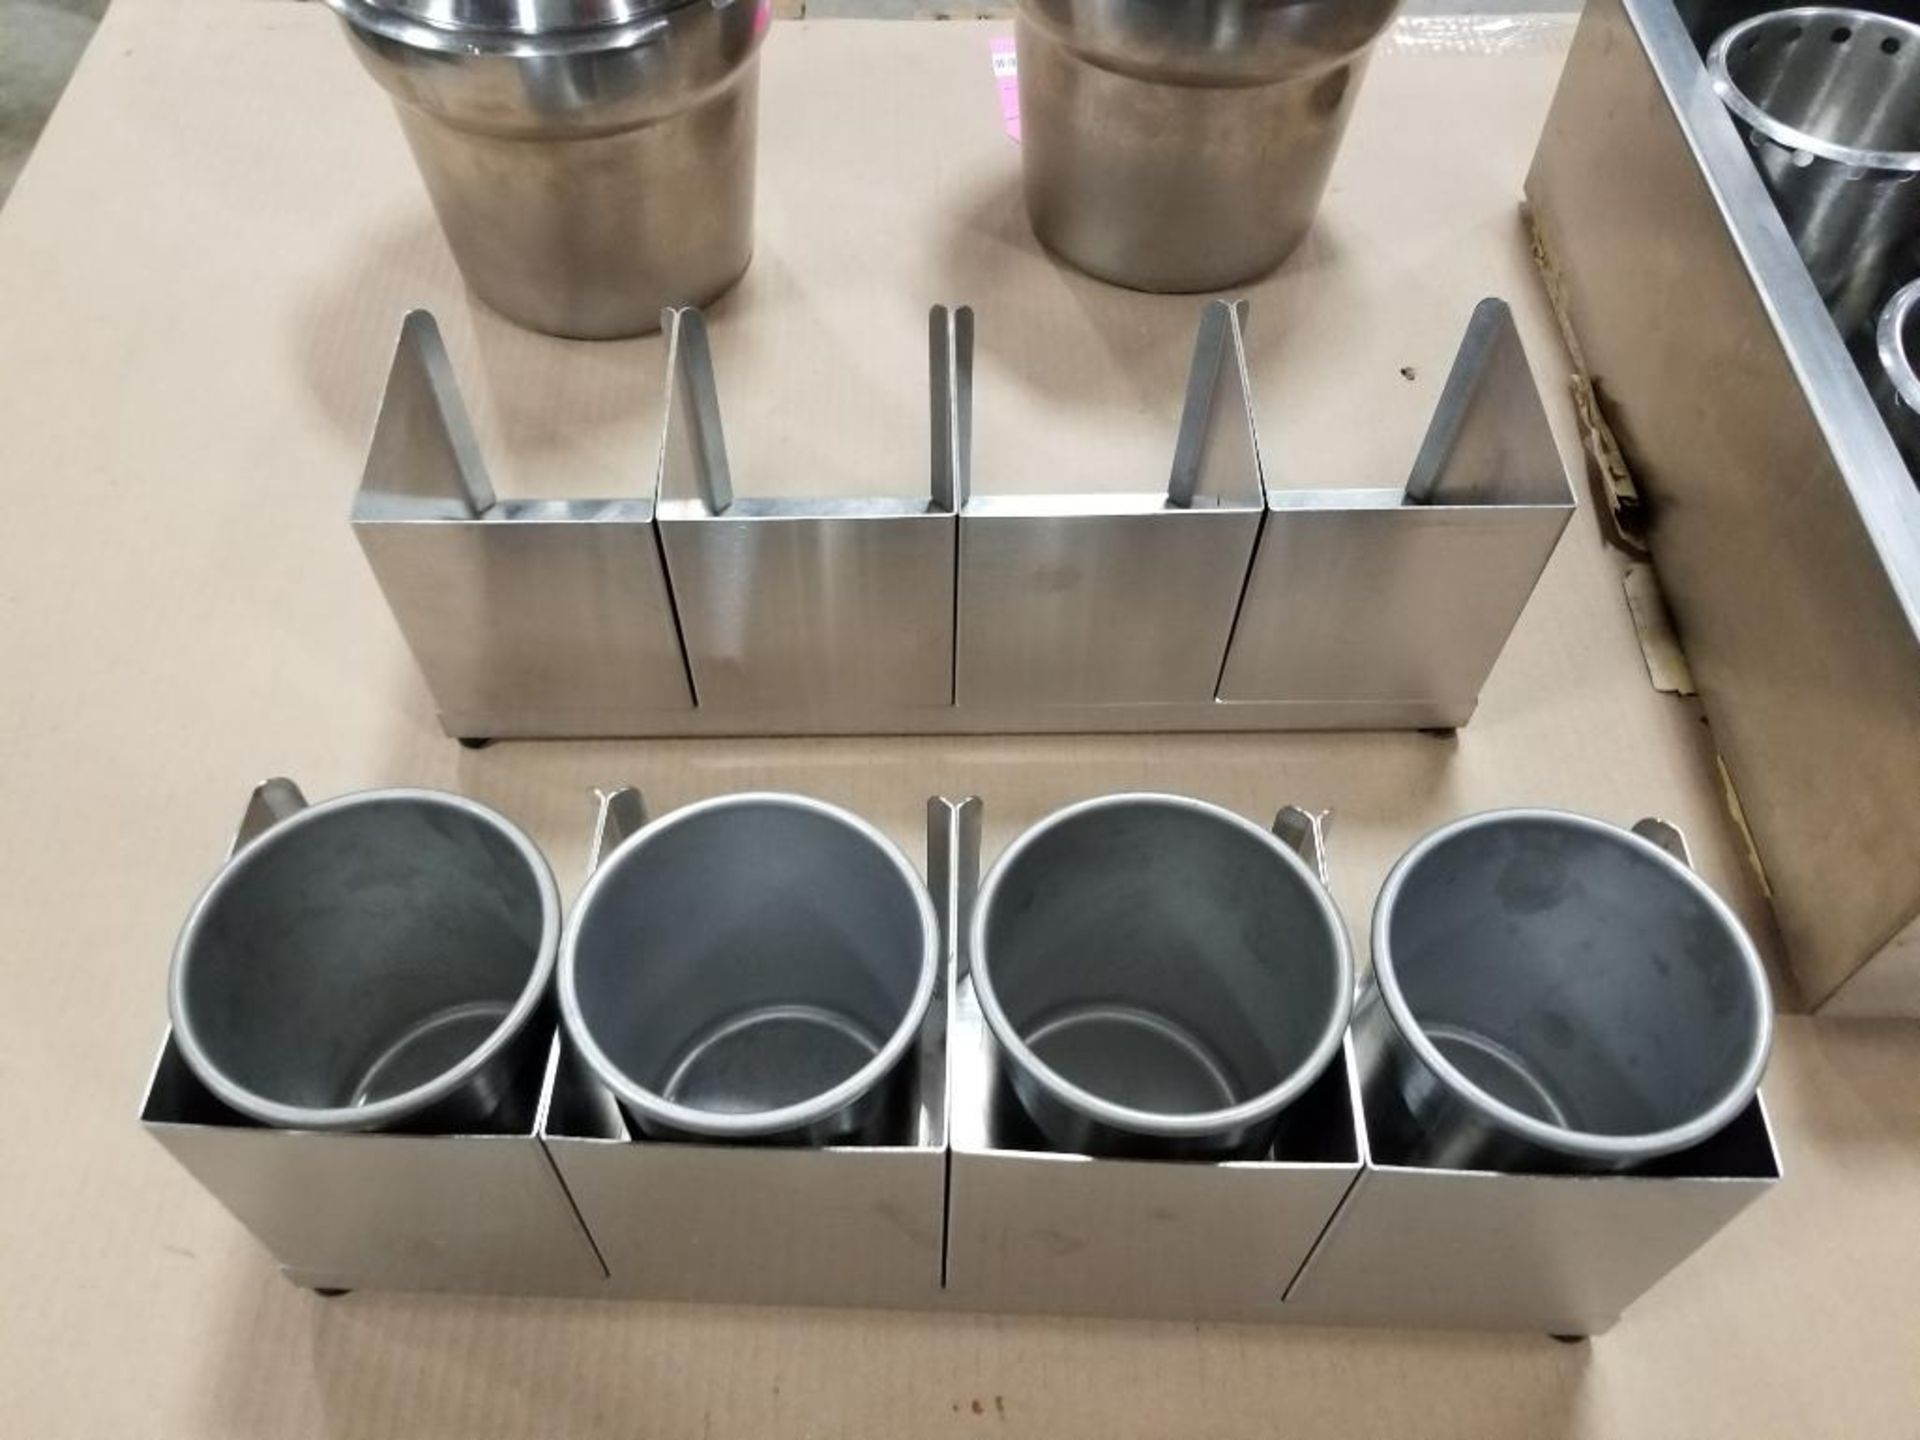 Stainless steel steam table and containers. - Image 13 of 16